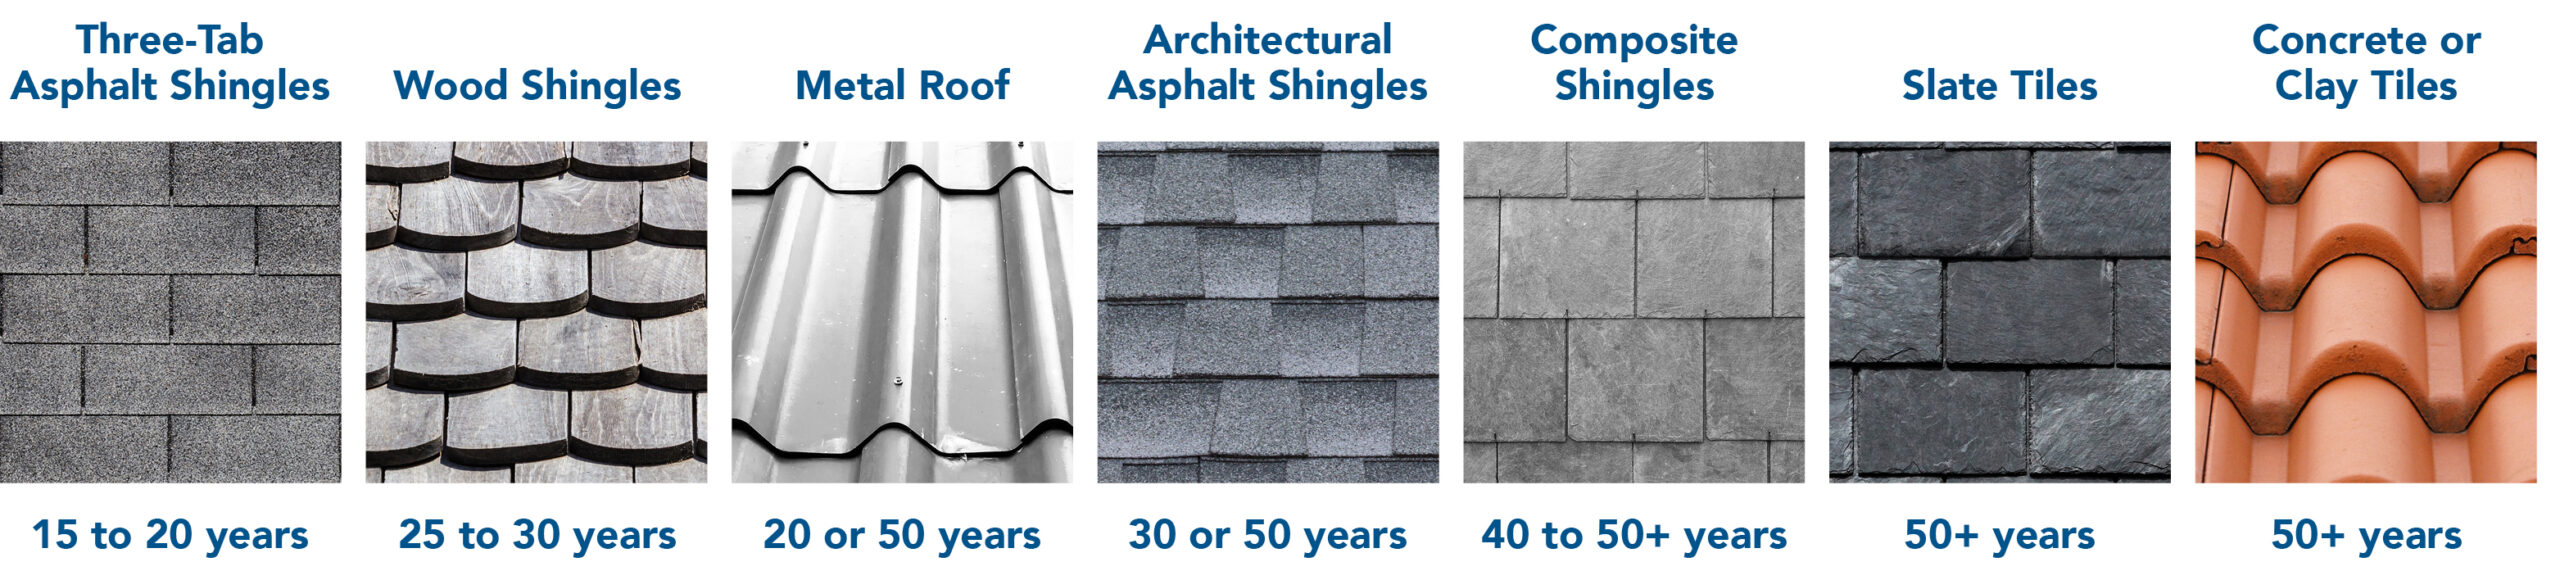 How Long Does a Roof Last Graphic by material type